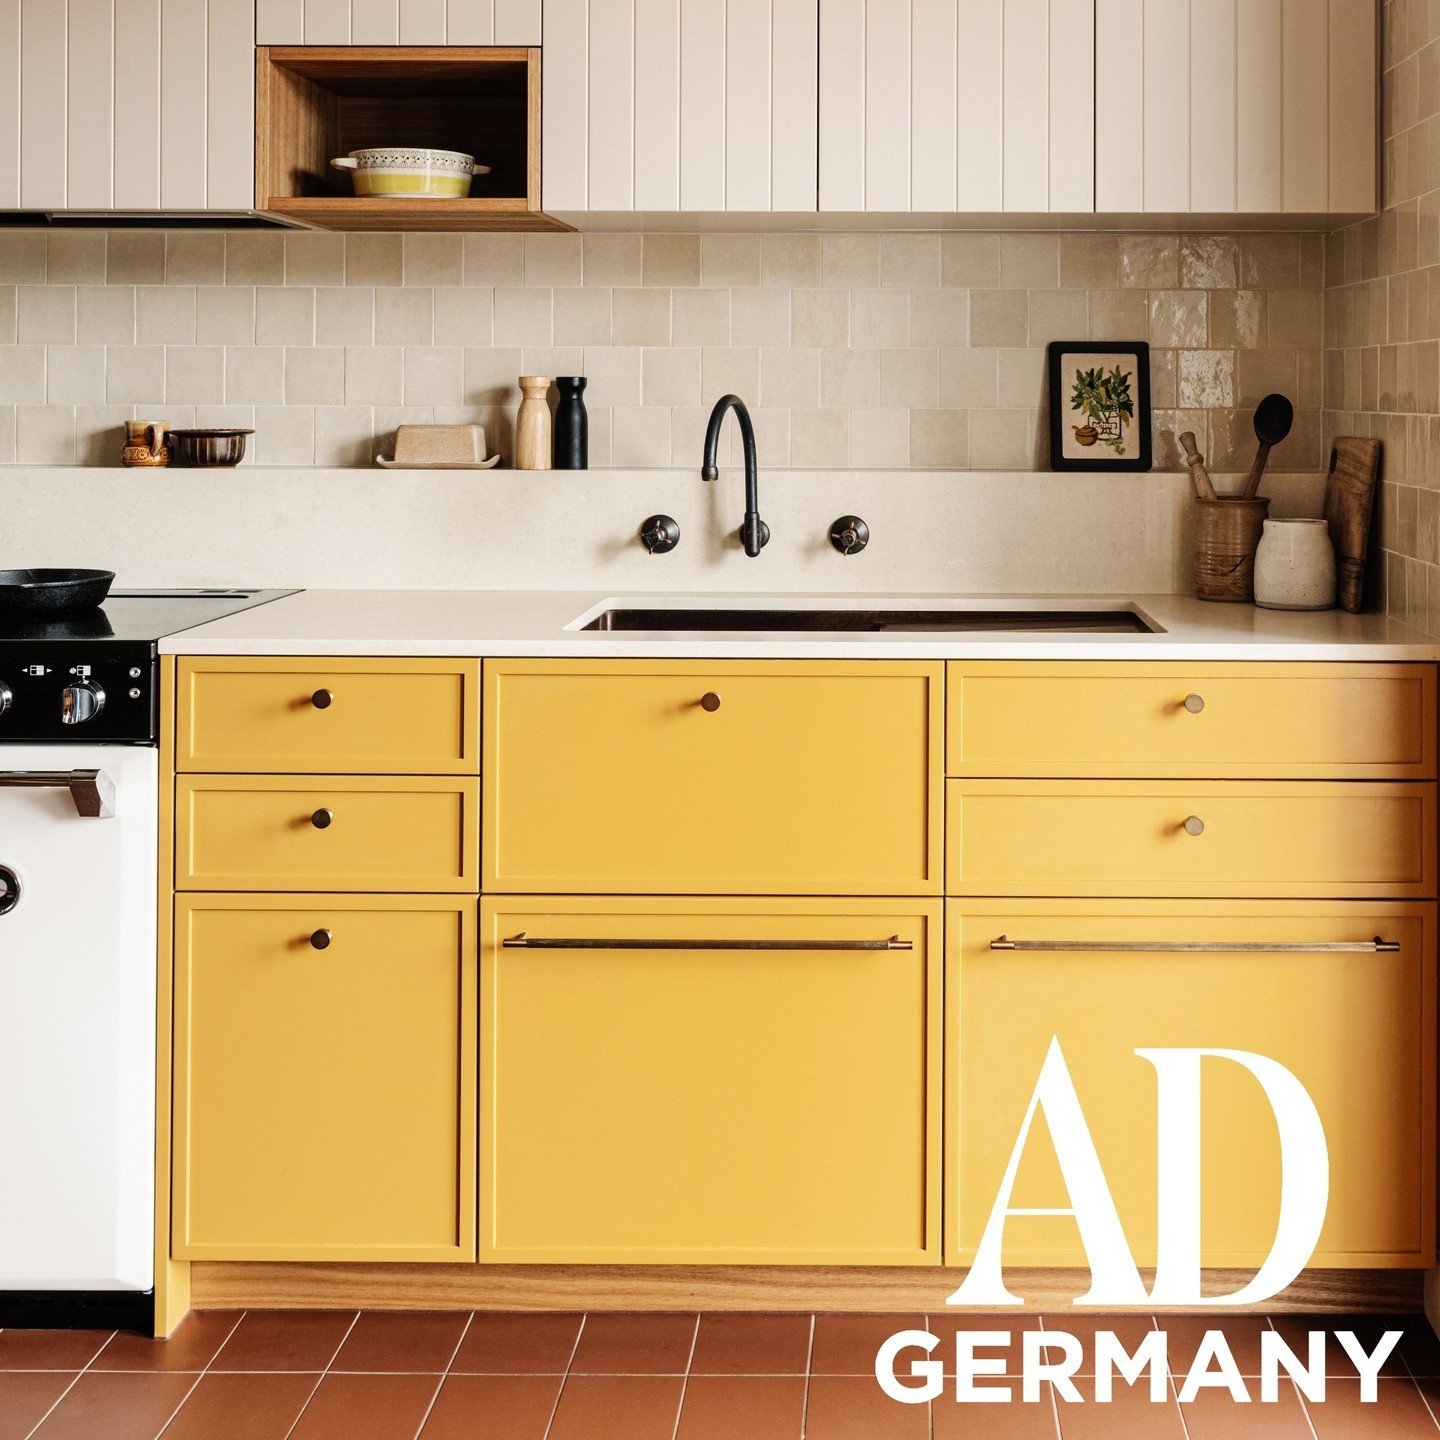 Thank you @ad_germany for featuring our Lovely Laura the Second kitchen with words by @melissagrustat. 'Working on Sunshine' is the perfect title for this uplifting kitchen, and was selected by AD to celebrate the start of summer in Europe. ⁠
⁠
Wheth